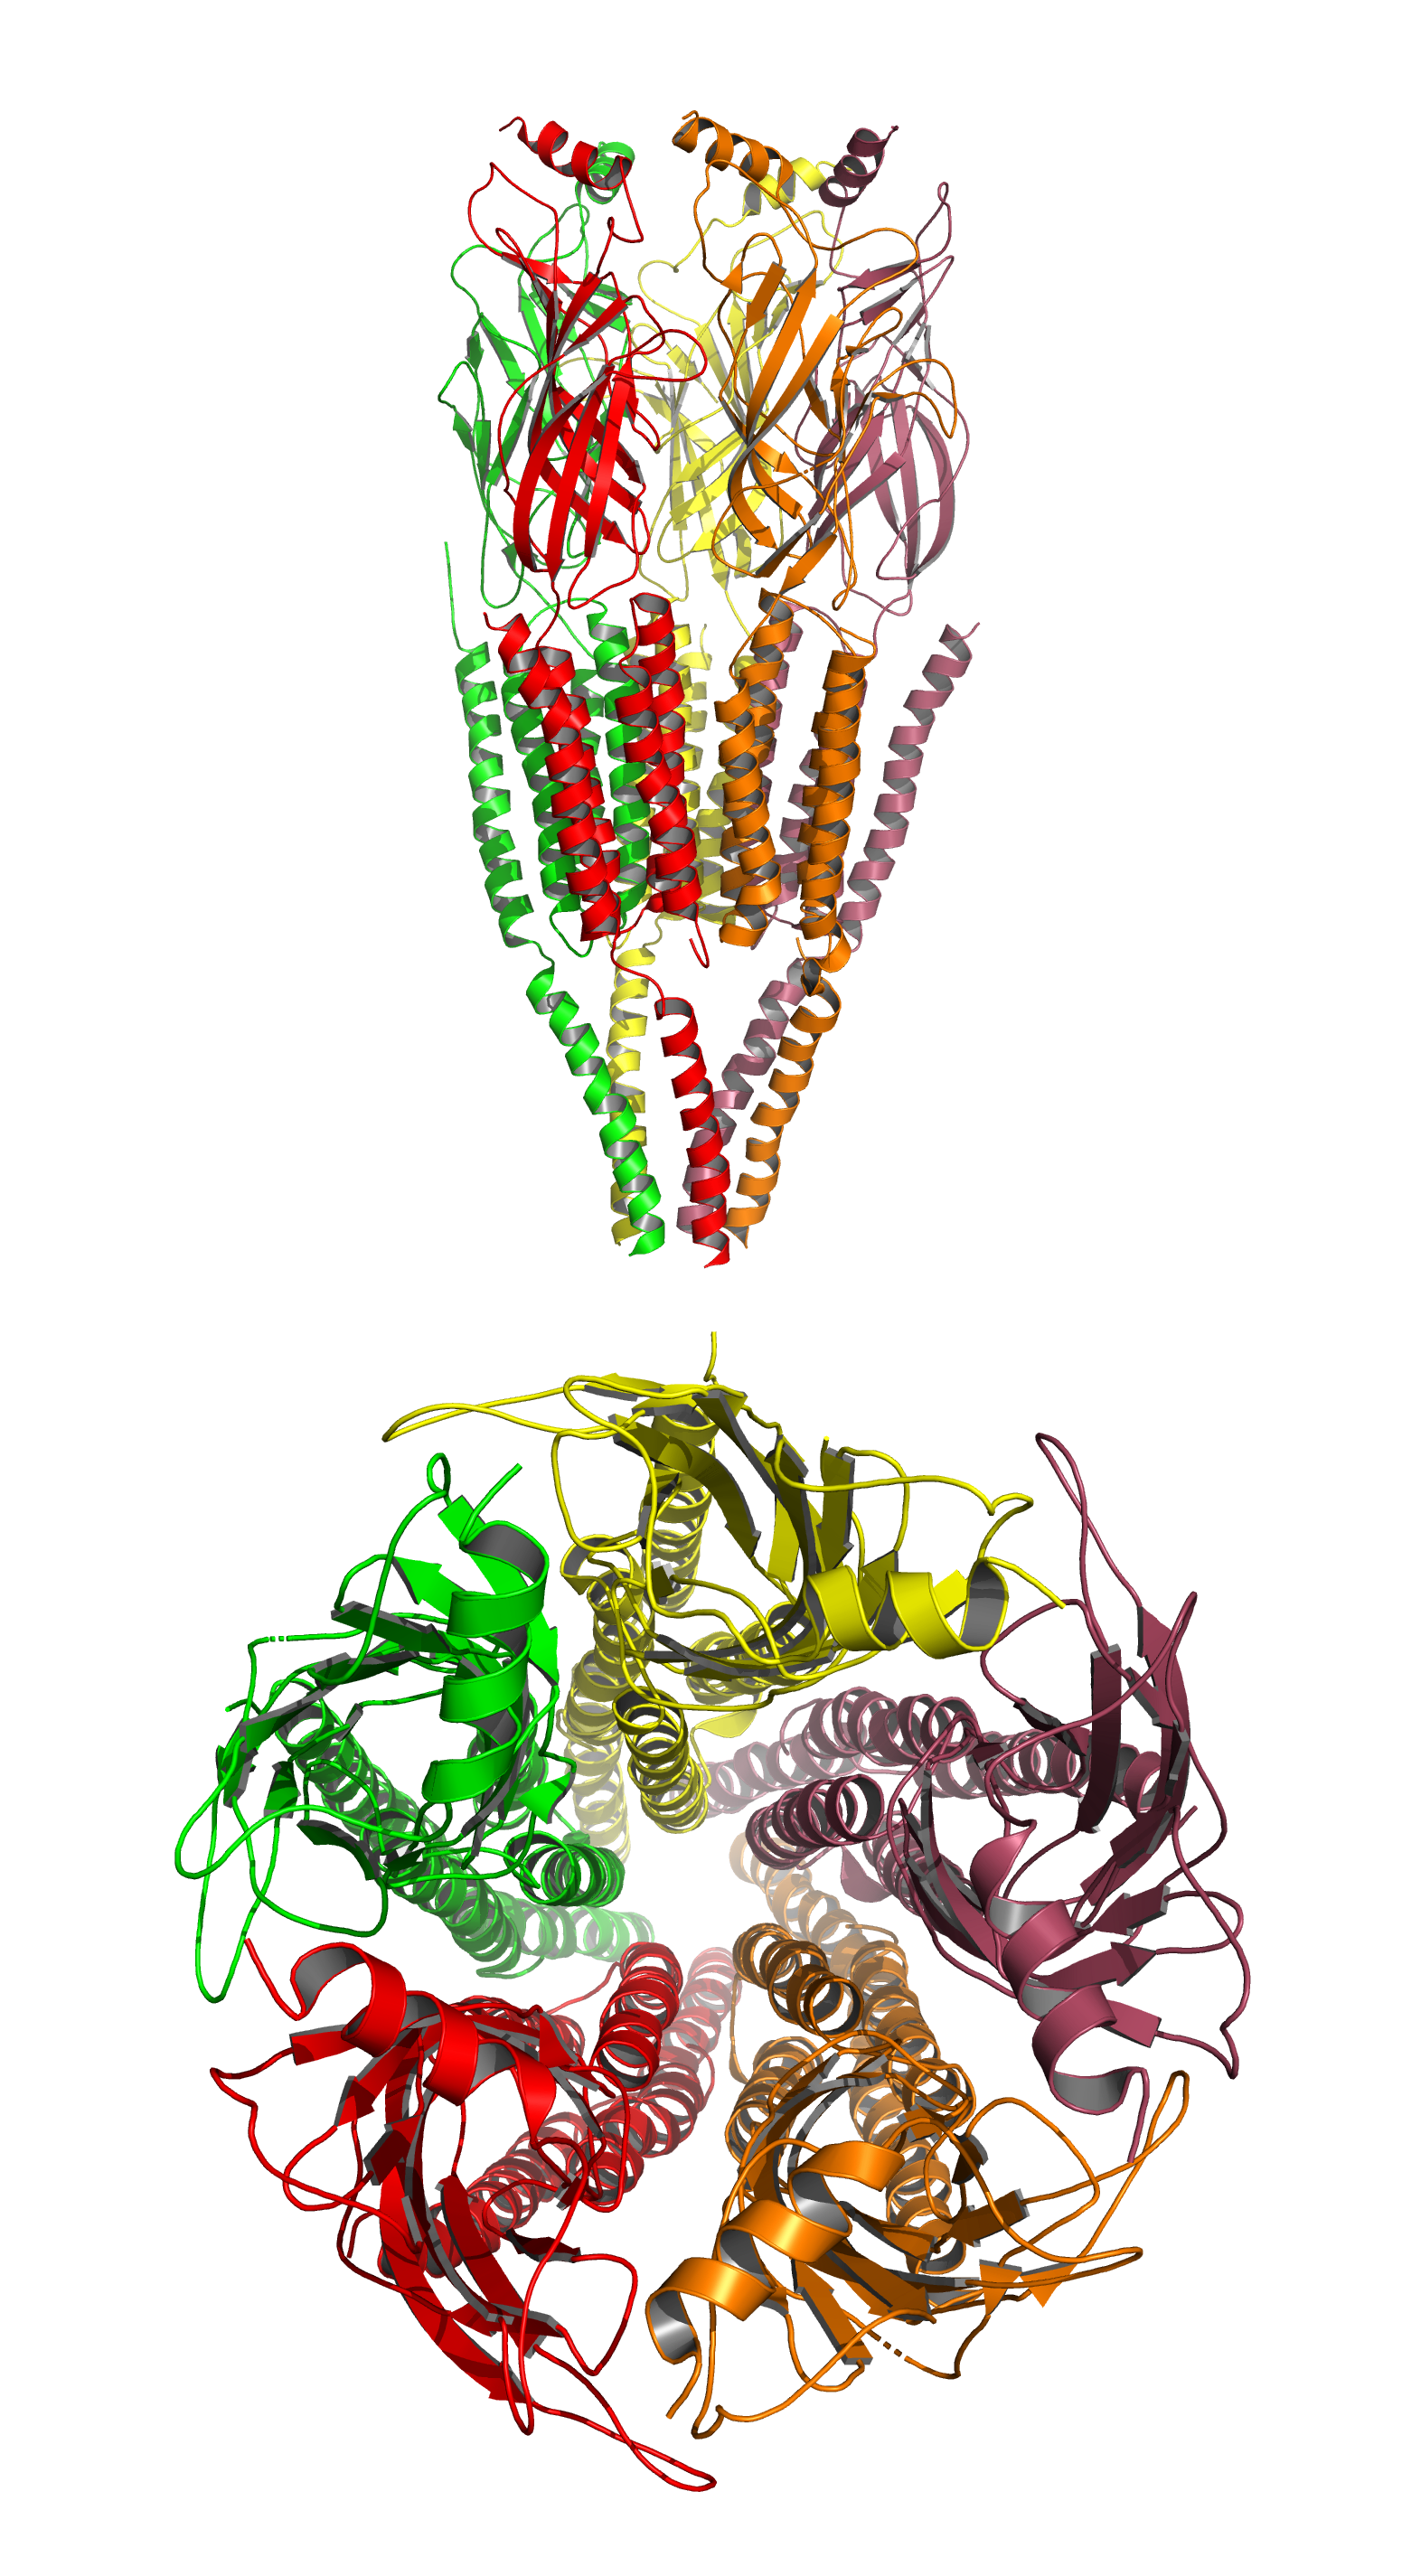 A cartoon representation of the atomic structure of the the nicotinic acetylcholine receptor from the electric ray Torpedo marmorata at 4Å resolution. Data from PDB 2BG9, rendered with open source molecular visualization tool PyMol.